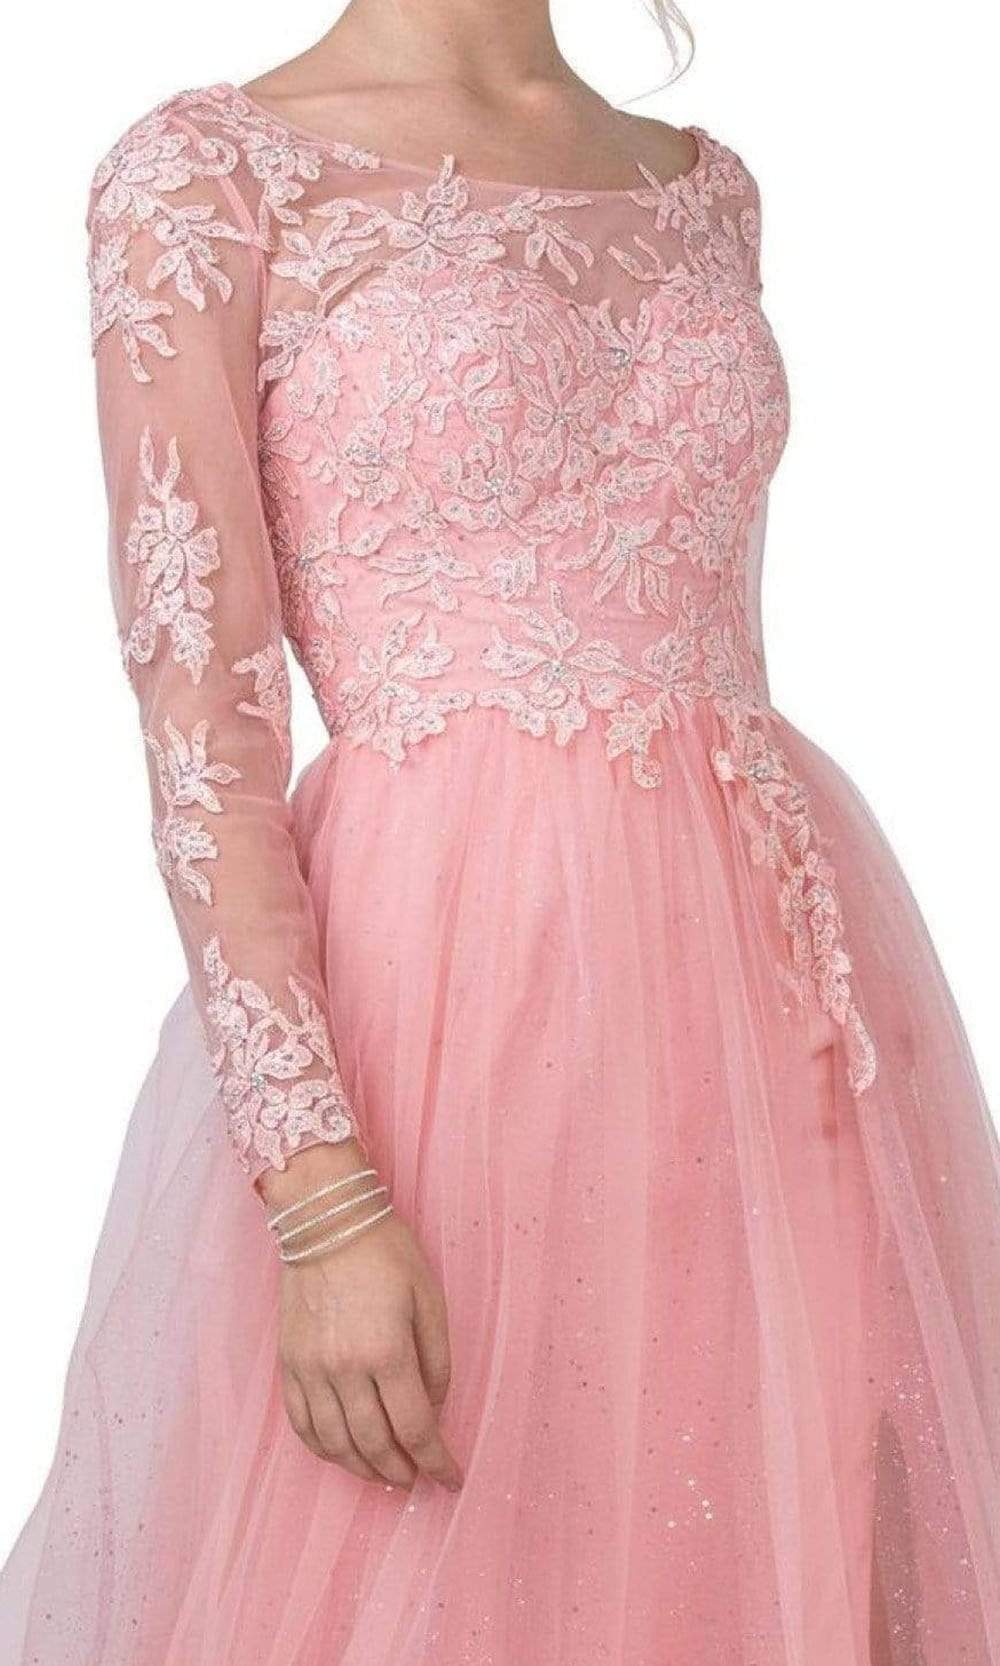 Aspeed Design - L2372 Dreamy Tulle Glittered A-Line Gown Prom Dresses